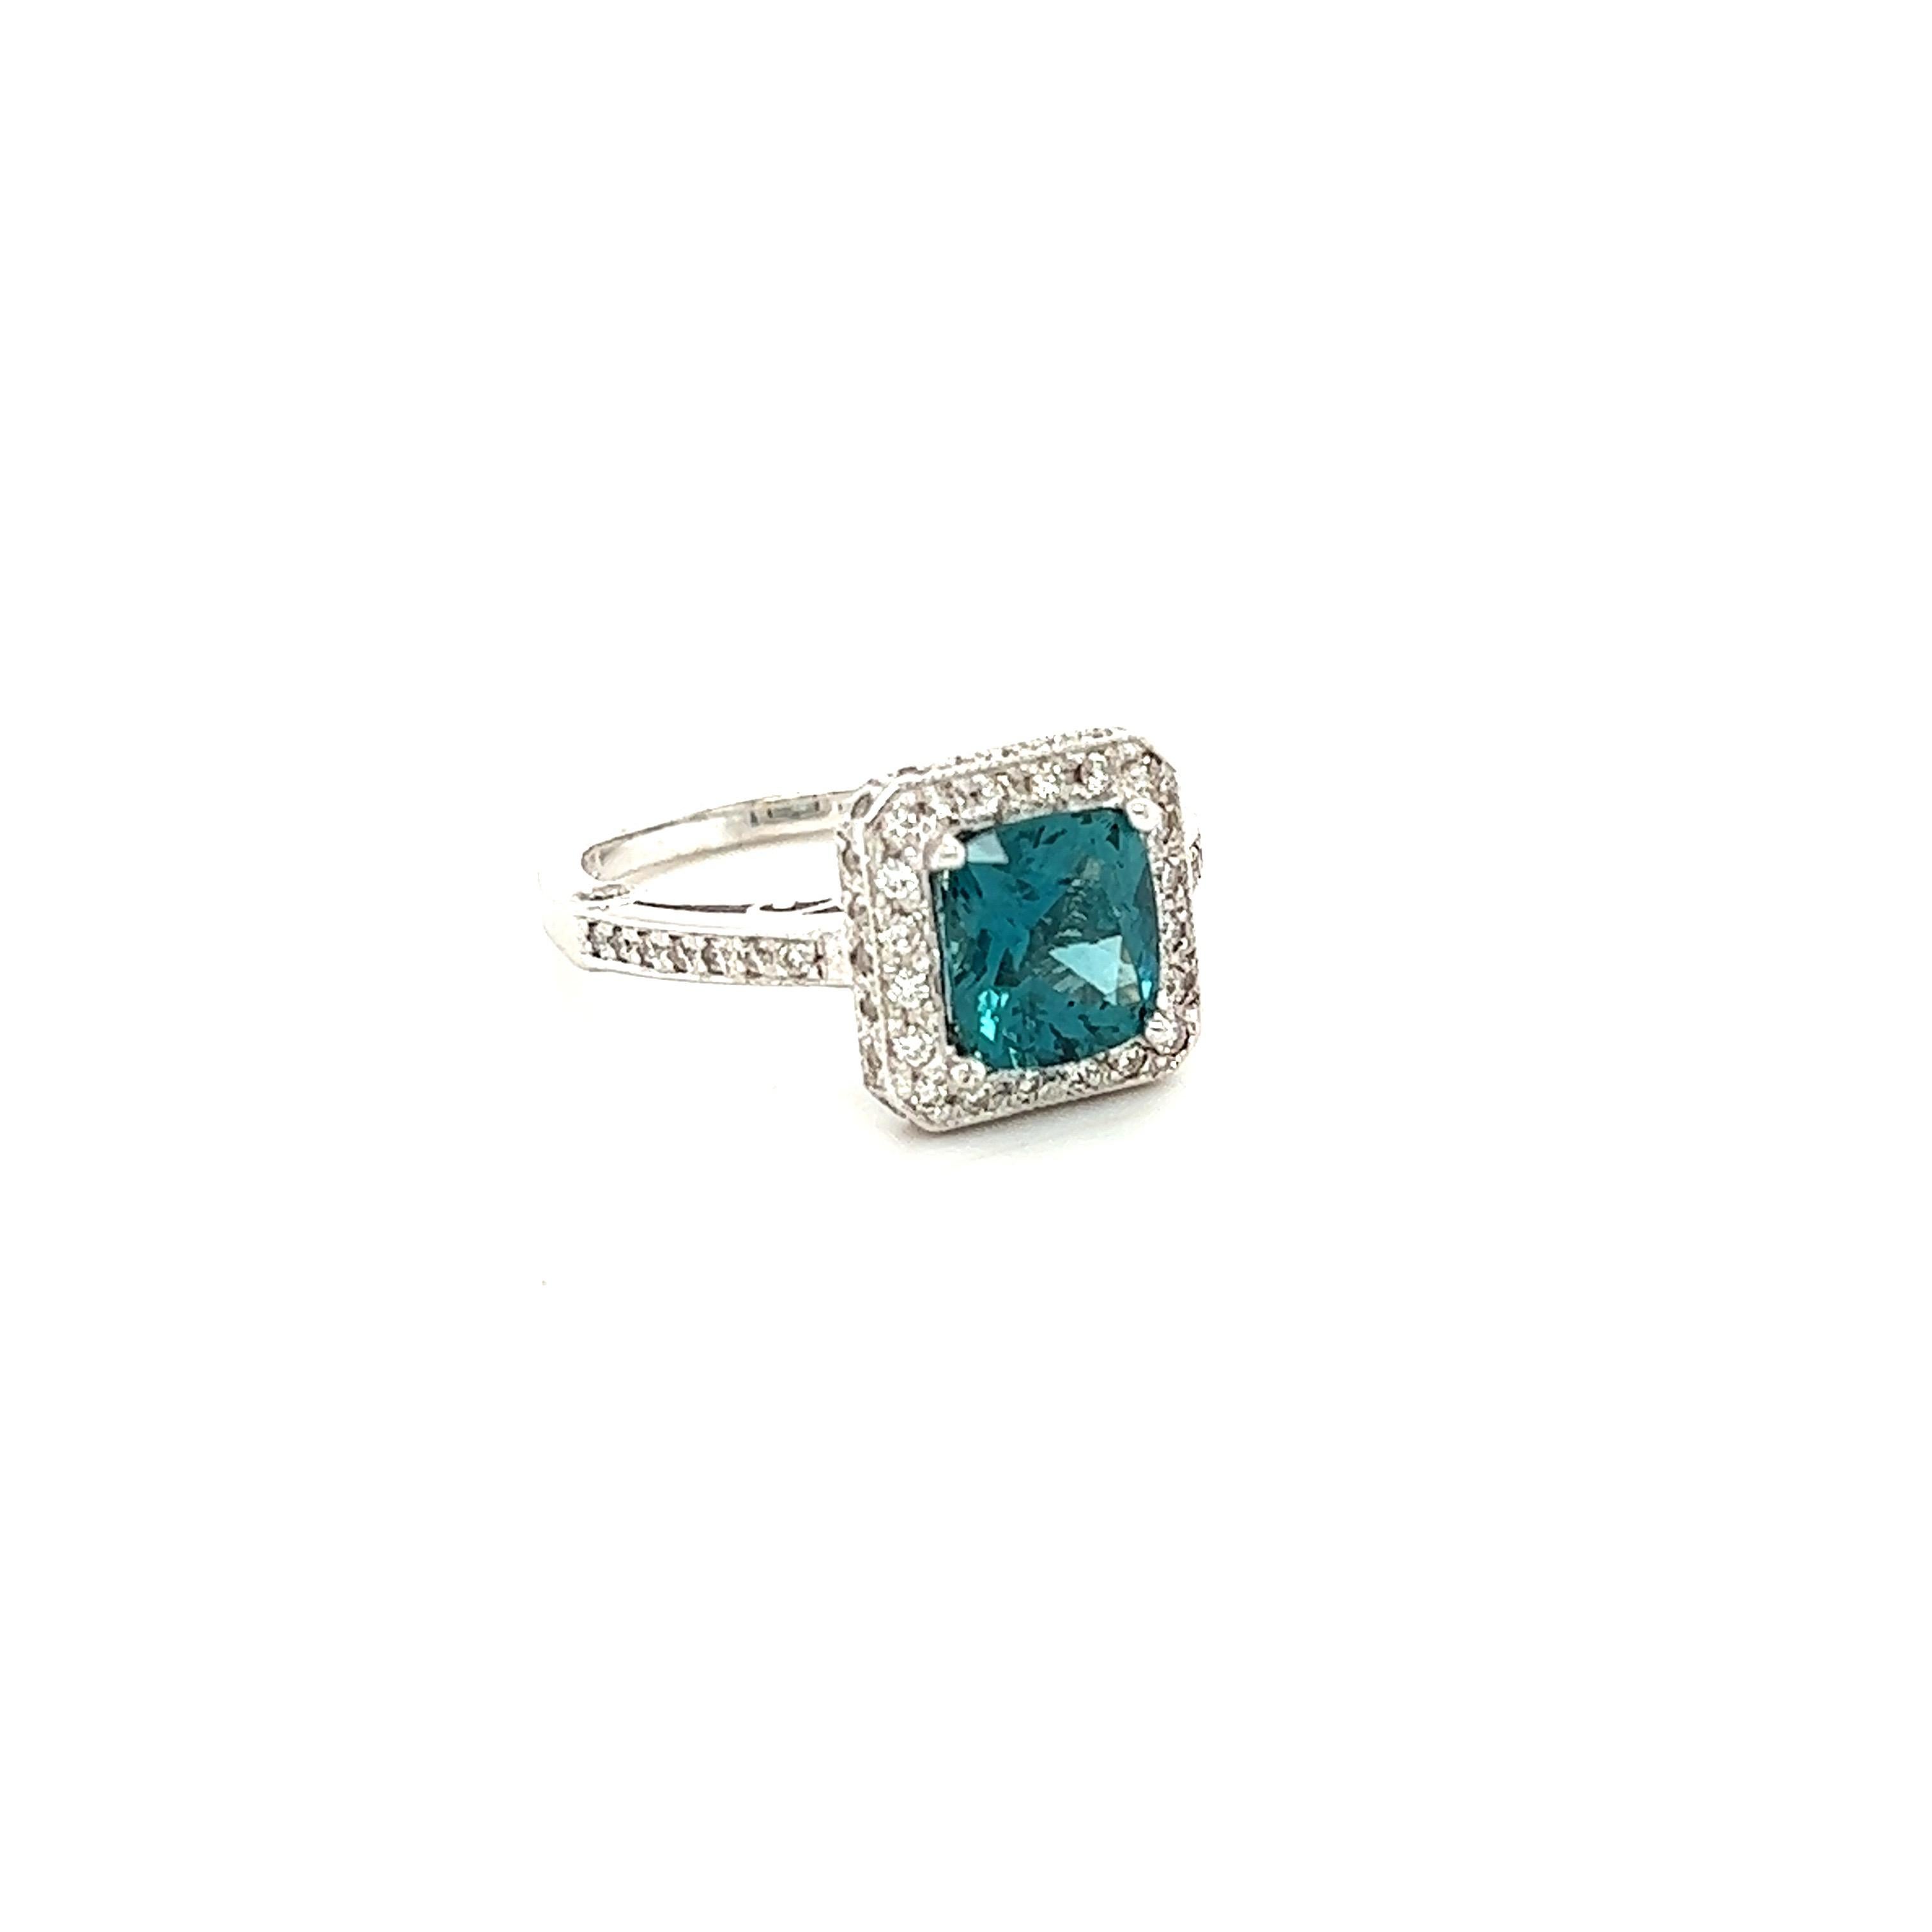 This ring has a 1.93 carat Natural Cushion Cut Apatite in the center of the ring and is surrounded by 62 Natural Round Cut Diamonds that weigh 0.51 carats. The clarity and color of the diamonds are VS-H. The total carat weight of the ring is 2.44